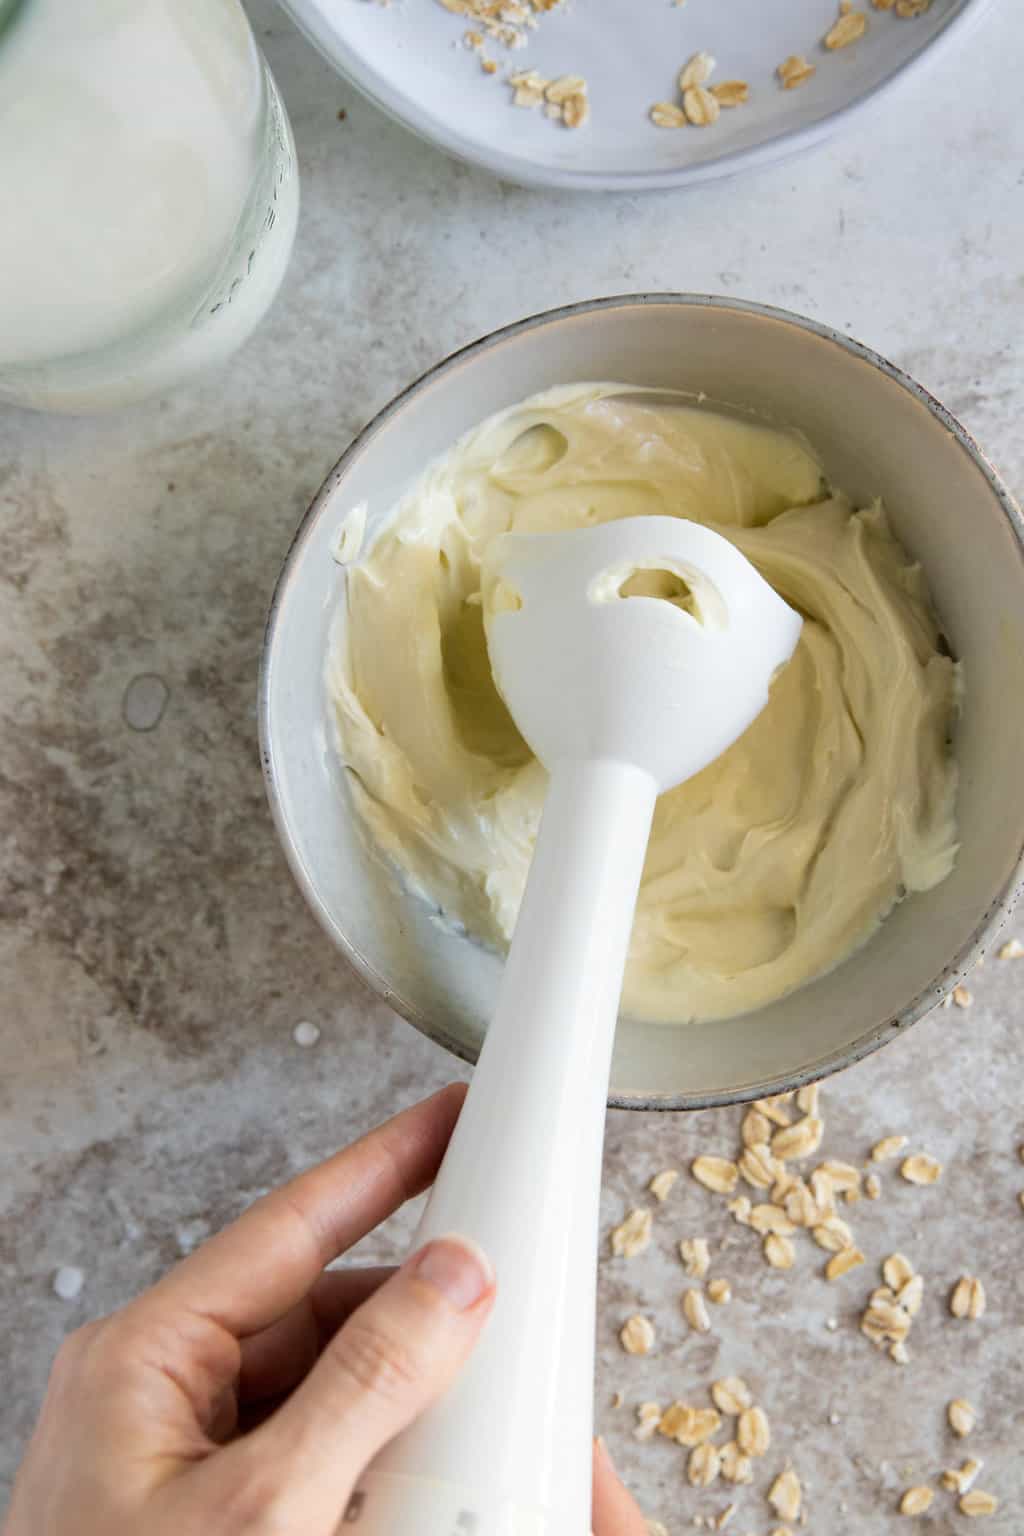 Combine oil and water phases with an immersion blender for homemade lotion